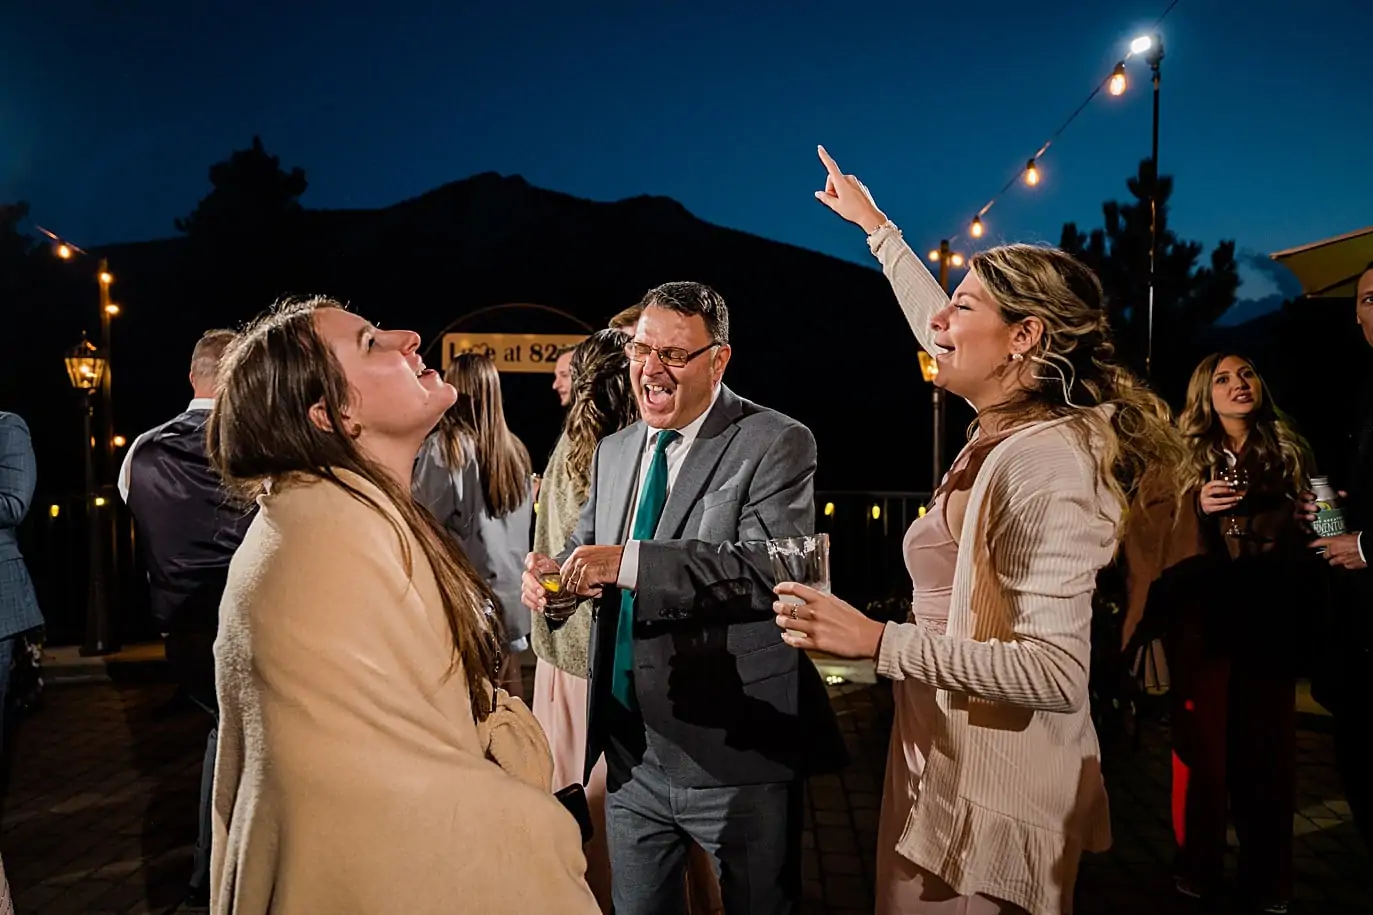 Outdoor dancing under the market lights at Della Terra Mountain Chateau wedding